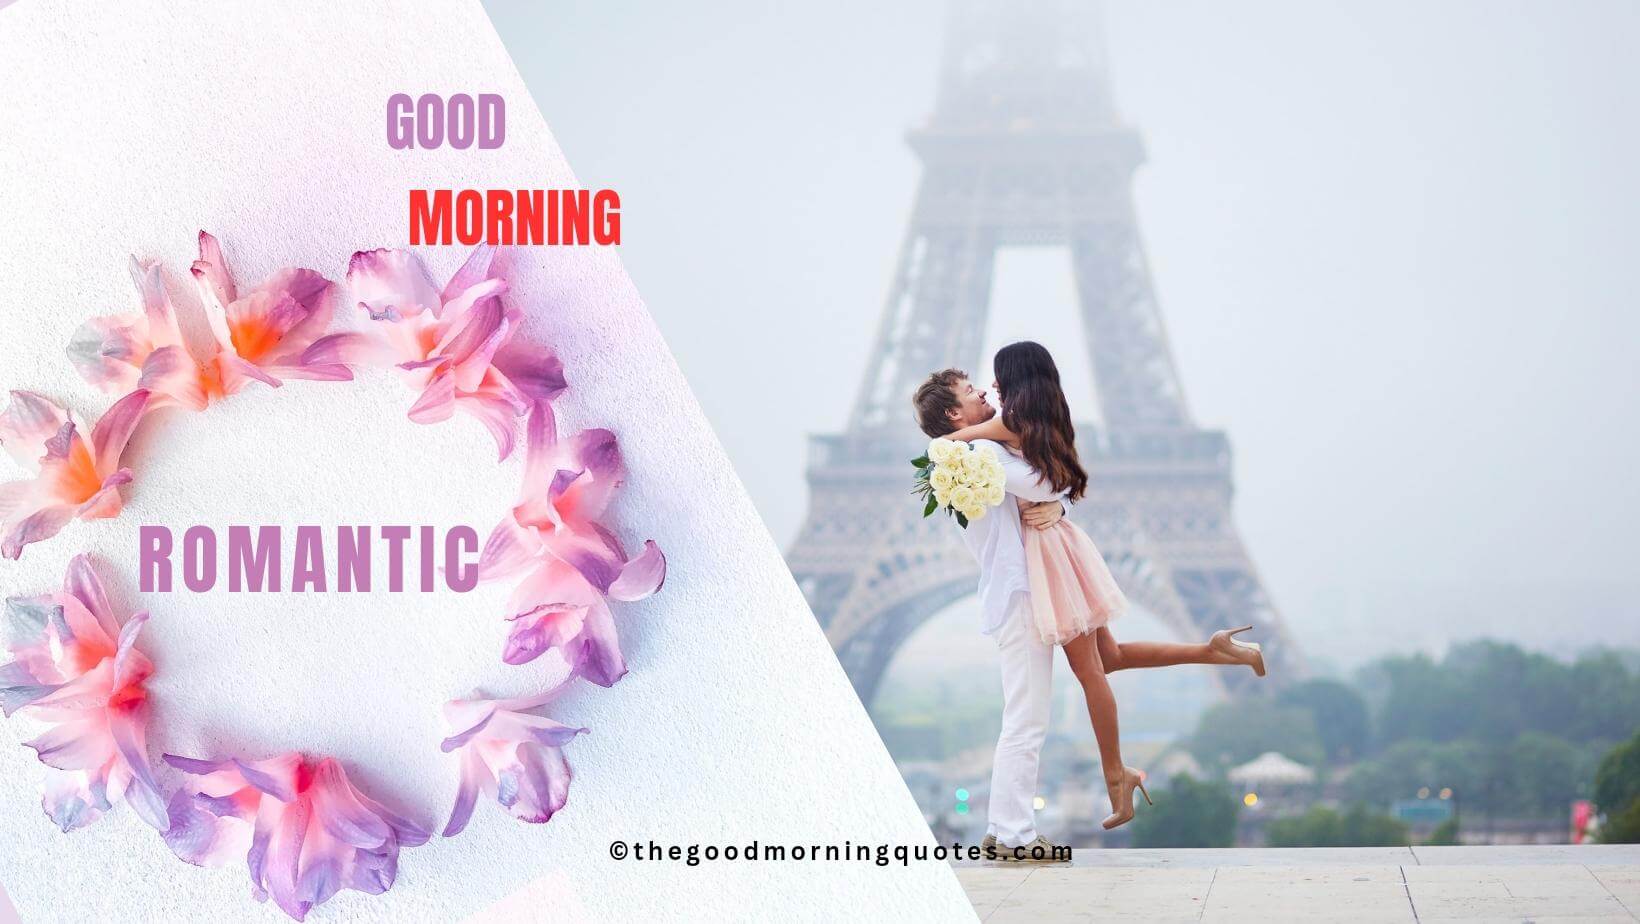 Romantic lover Good morning Quotes in Hindi